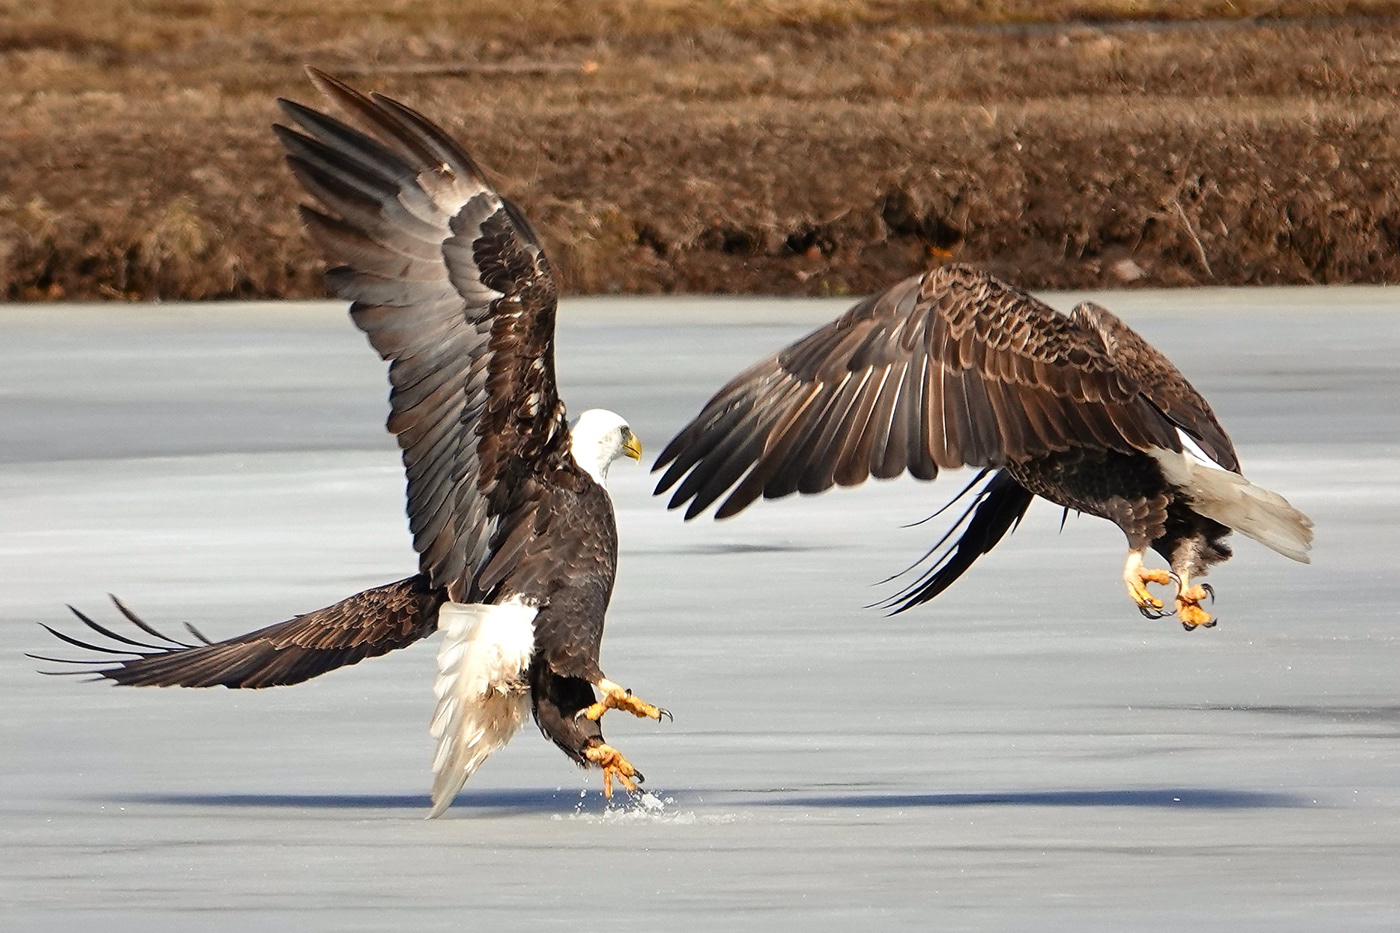 a day in the life animals bald eagels birds eagles fighting eagles preybirds river talons wildlife